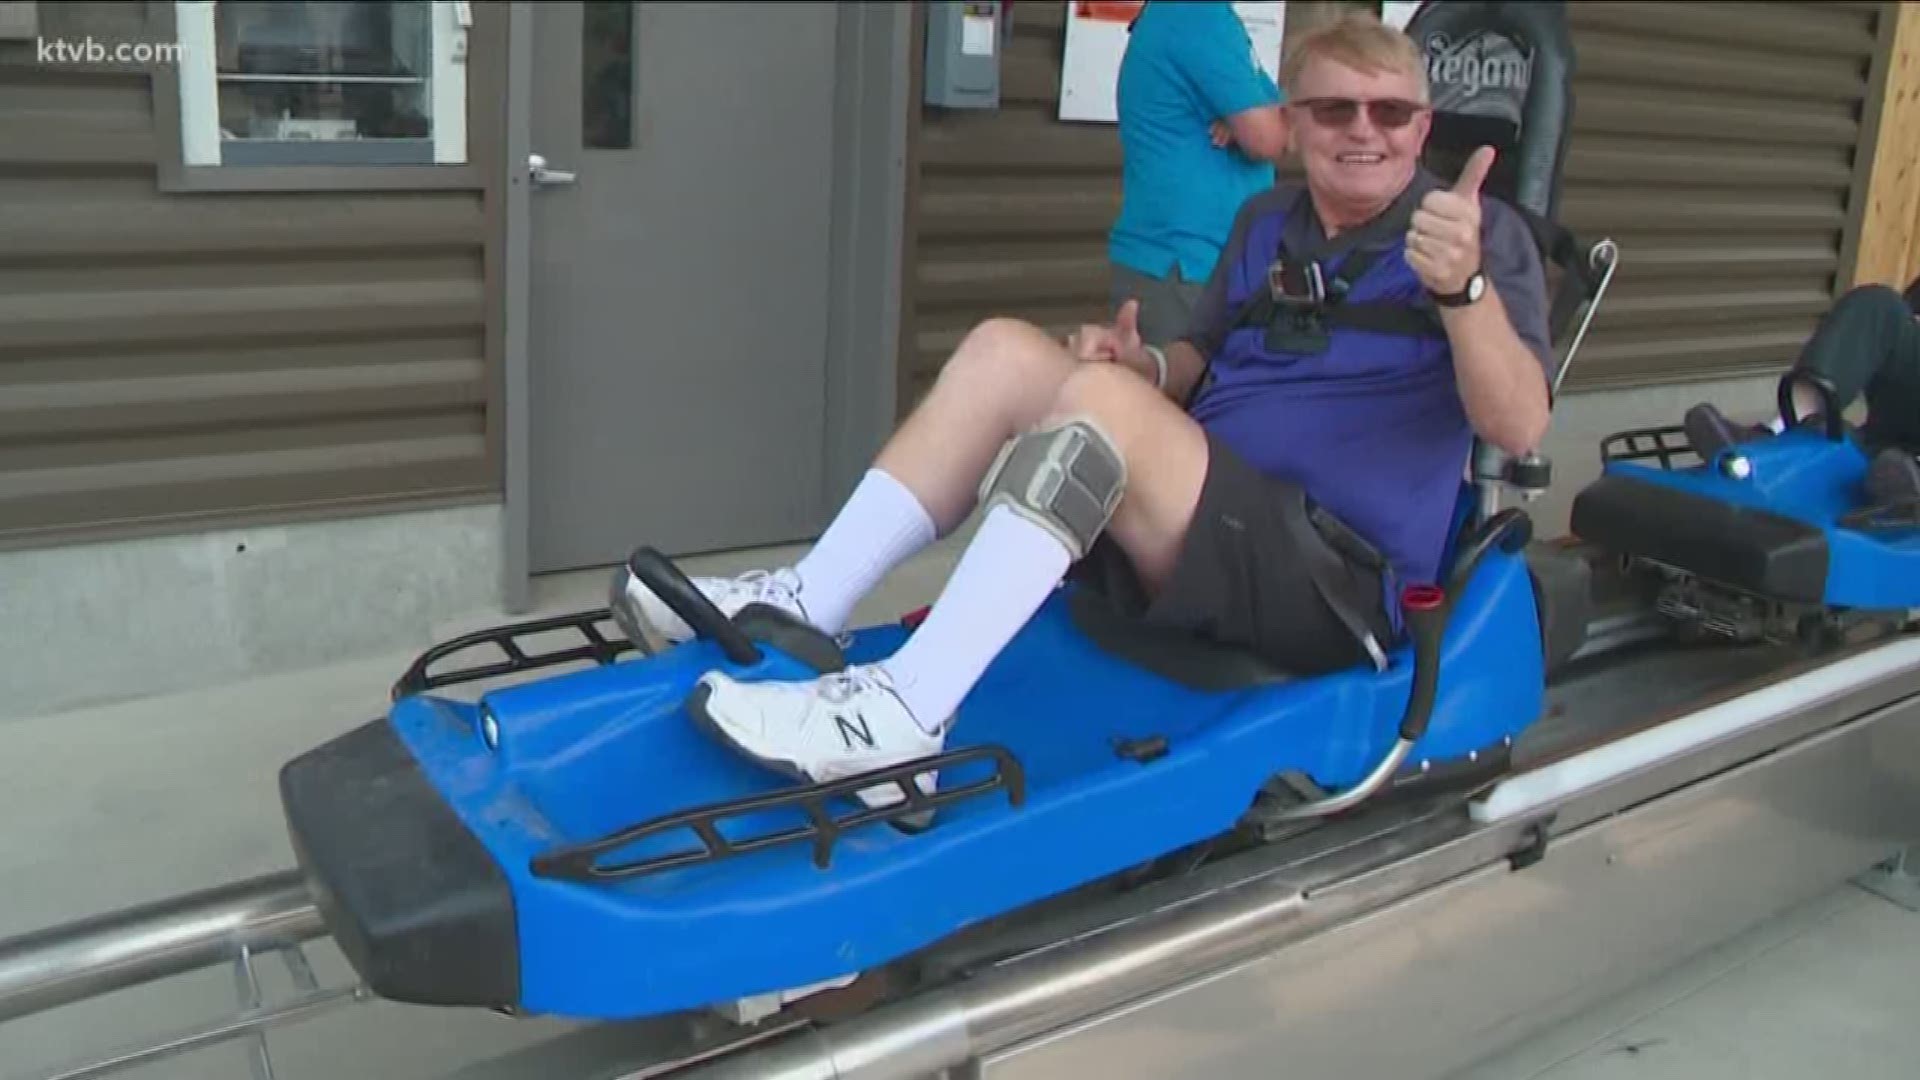 Gordan Myre says he was "bummed" when he realized the mountain coaster at Bogus Basin wasn't wheelchair accessible. Sunday afternoon, he finally got the chance to ride. 